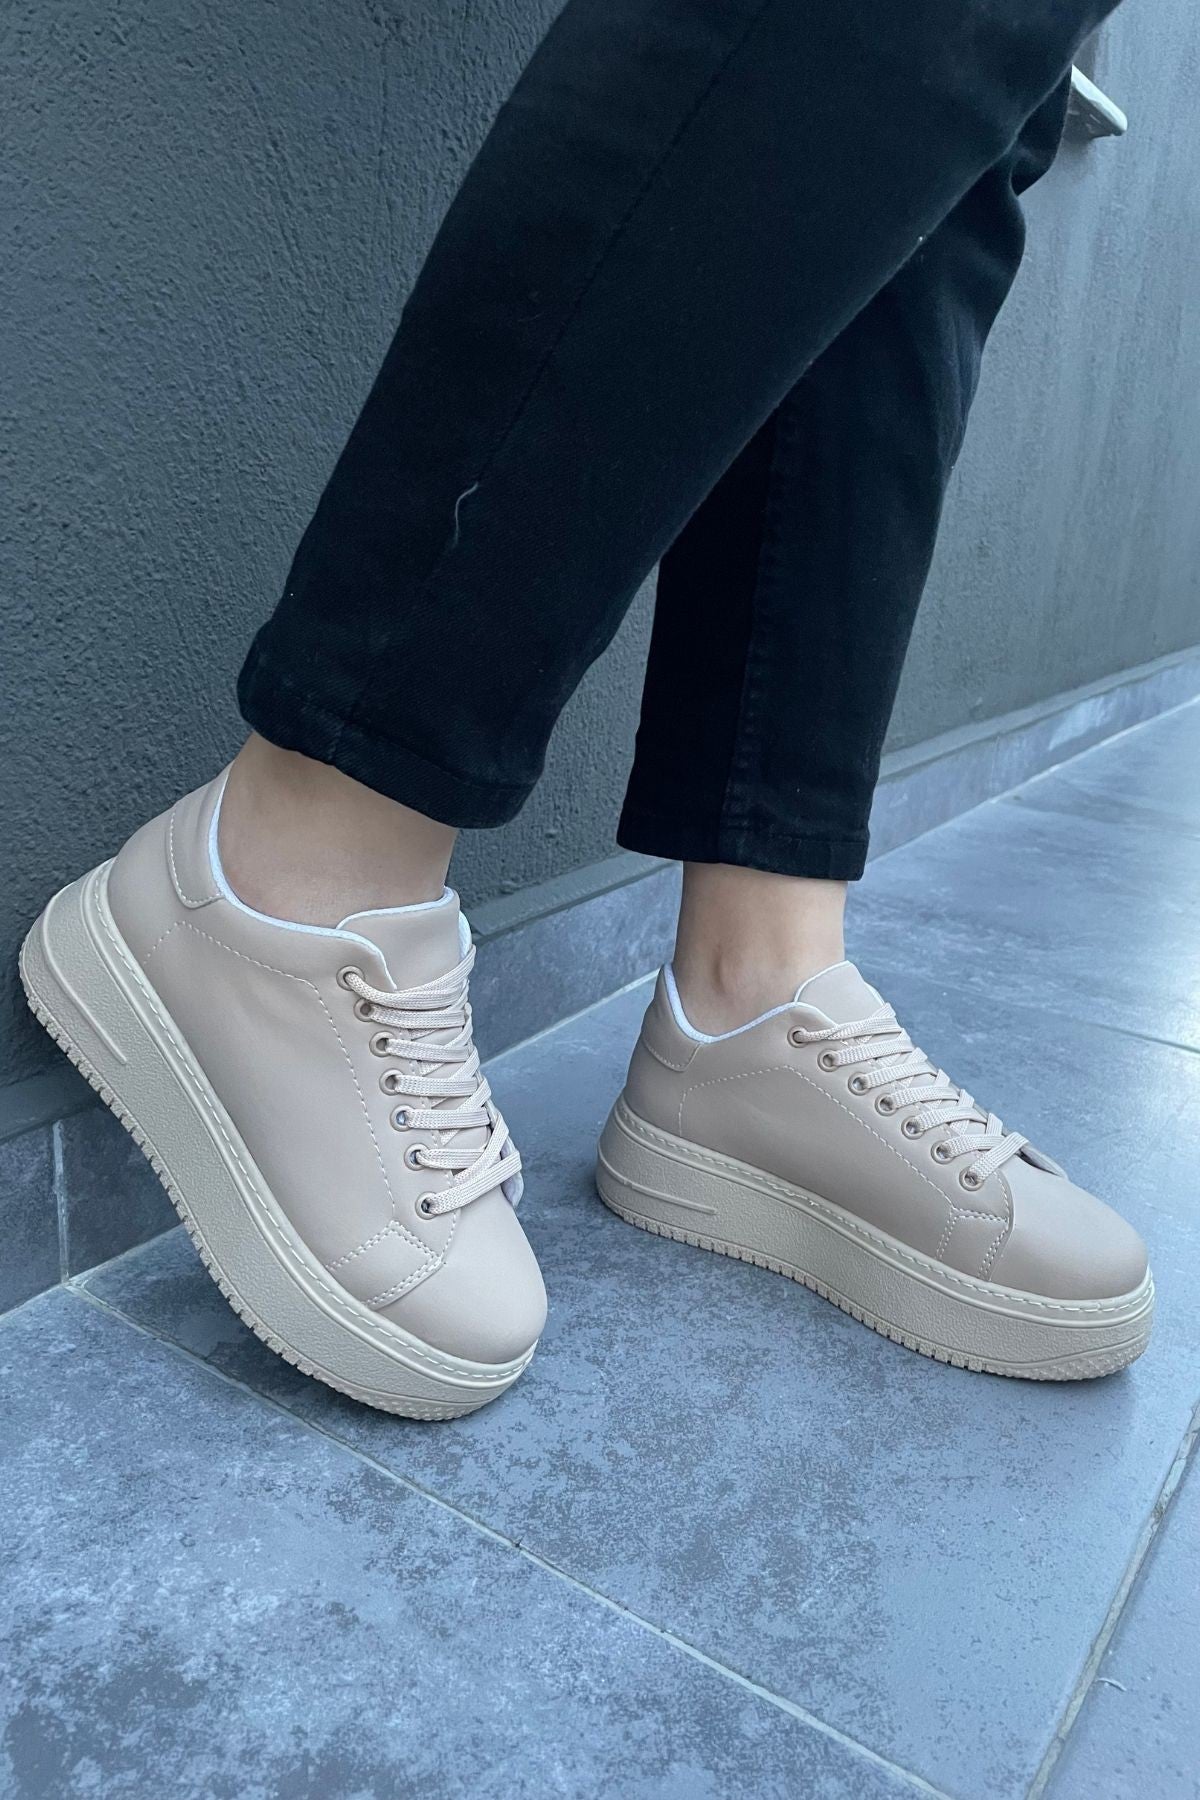 Women's Leran Nude Skin Lace-up Sneakers Sports Shoes - STREETMODE ™